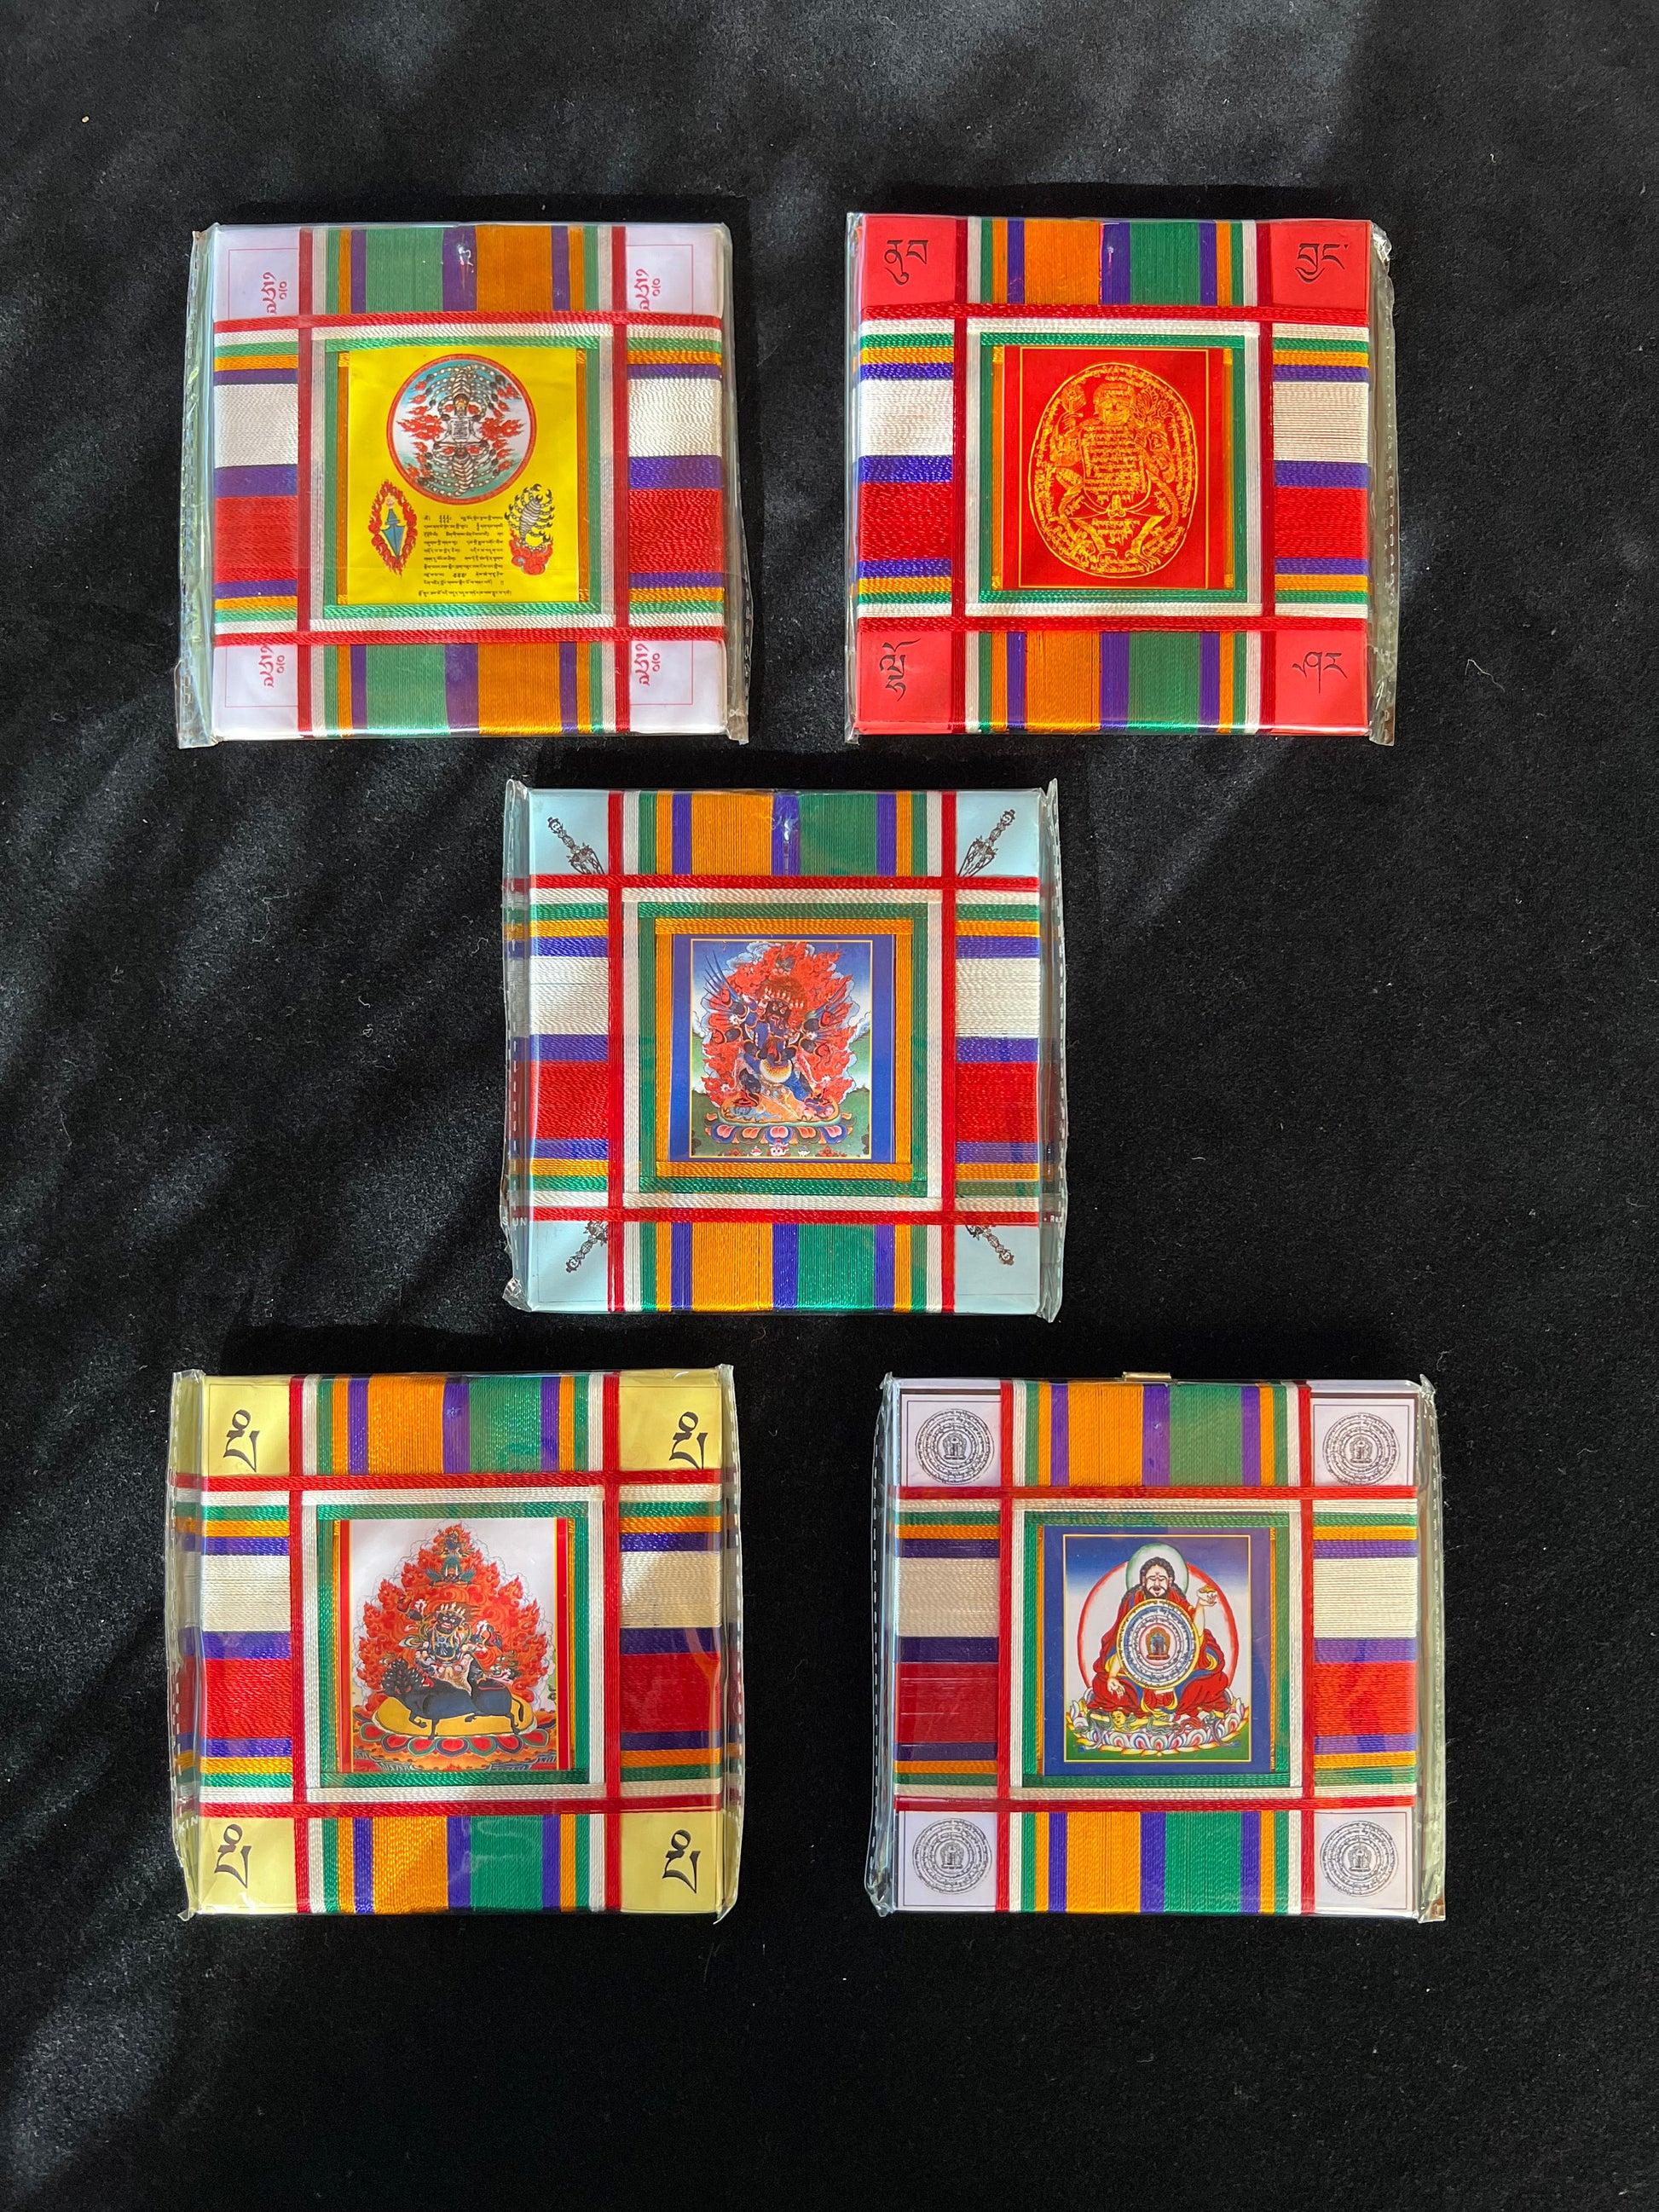 Healing Blessing Amulet | | 4.5 in by 4.5 in | Protection Blessing | Dorje Gotrab/Parnashavari Amulet (Tib. Loma Gyonma)